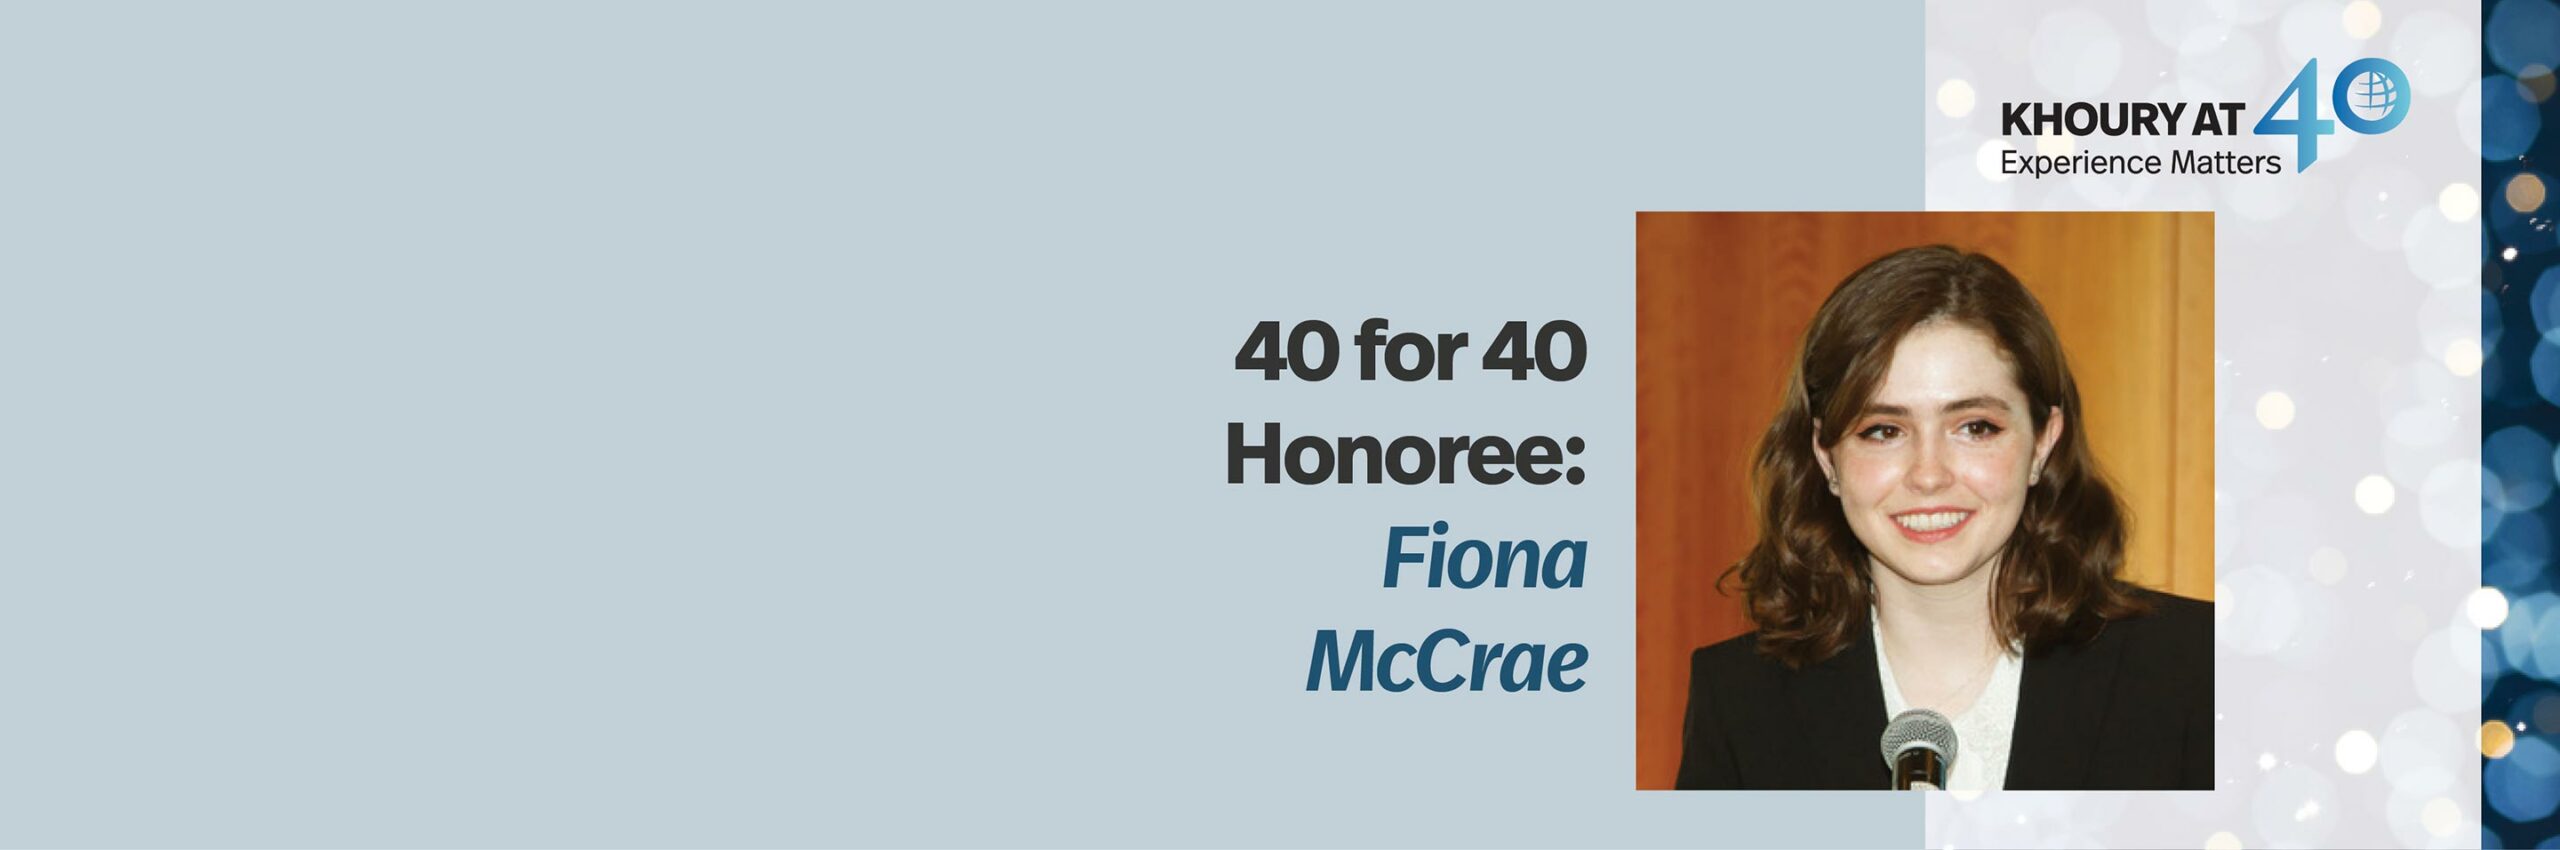 40 for 40 Honoree: Fiona MdCrae